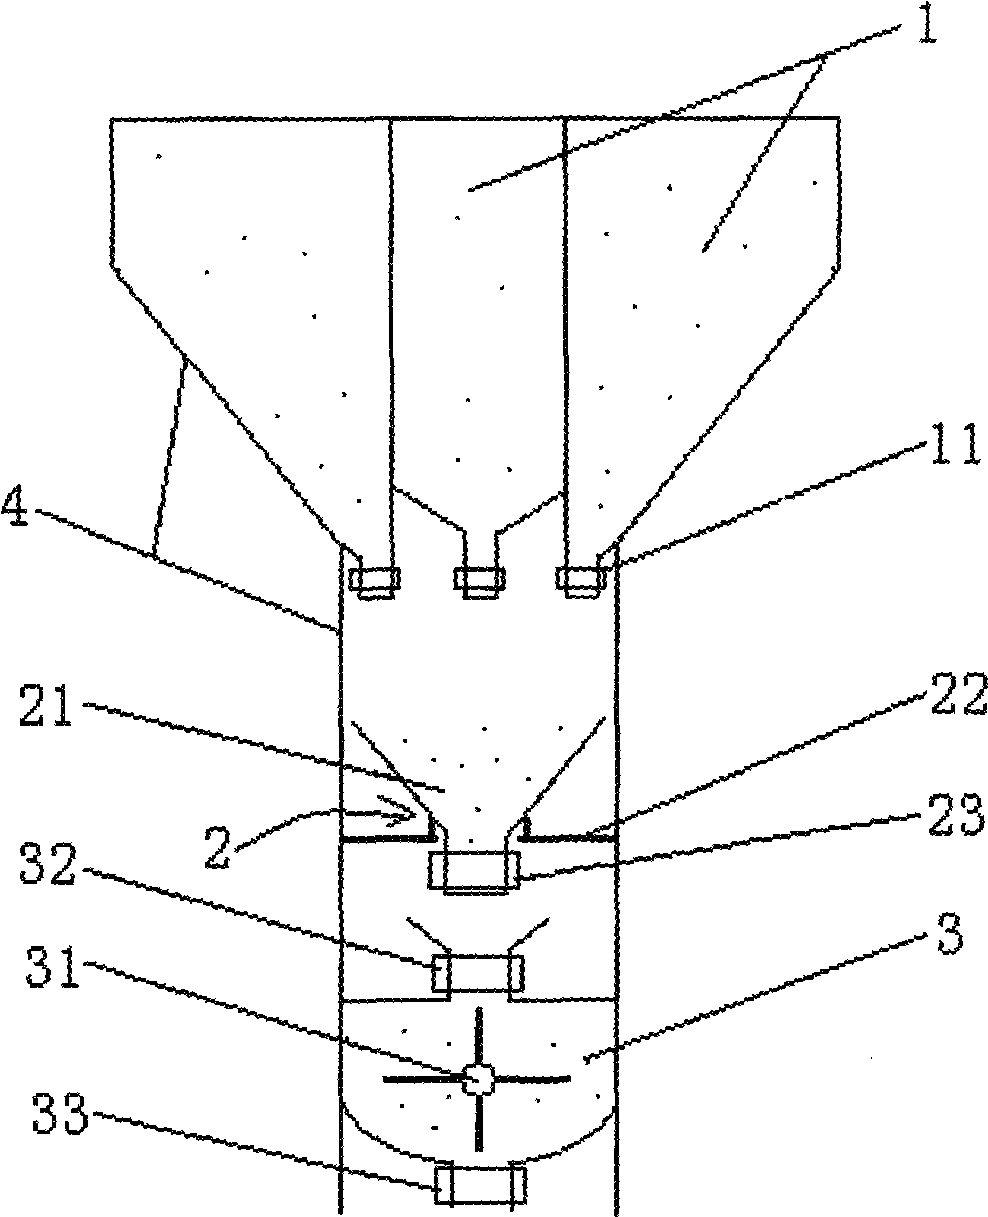 Man-made lawn raw material mixing device